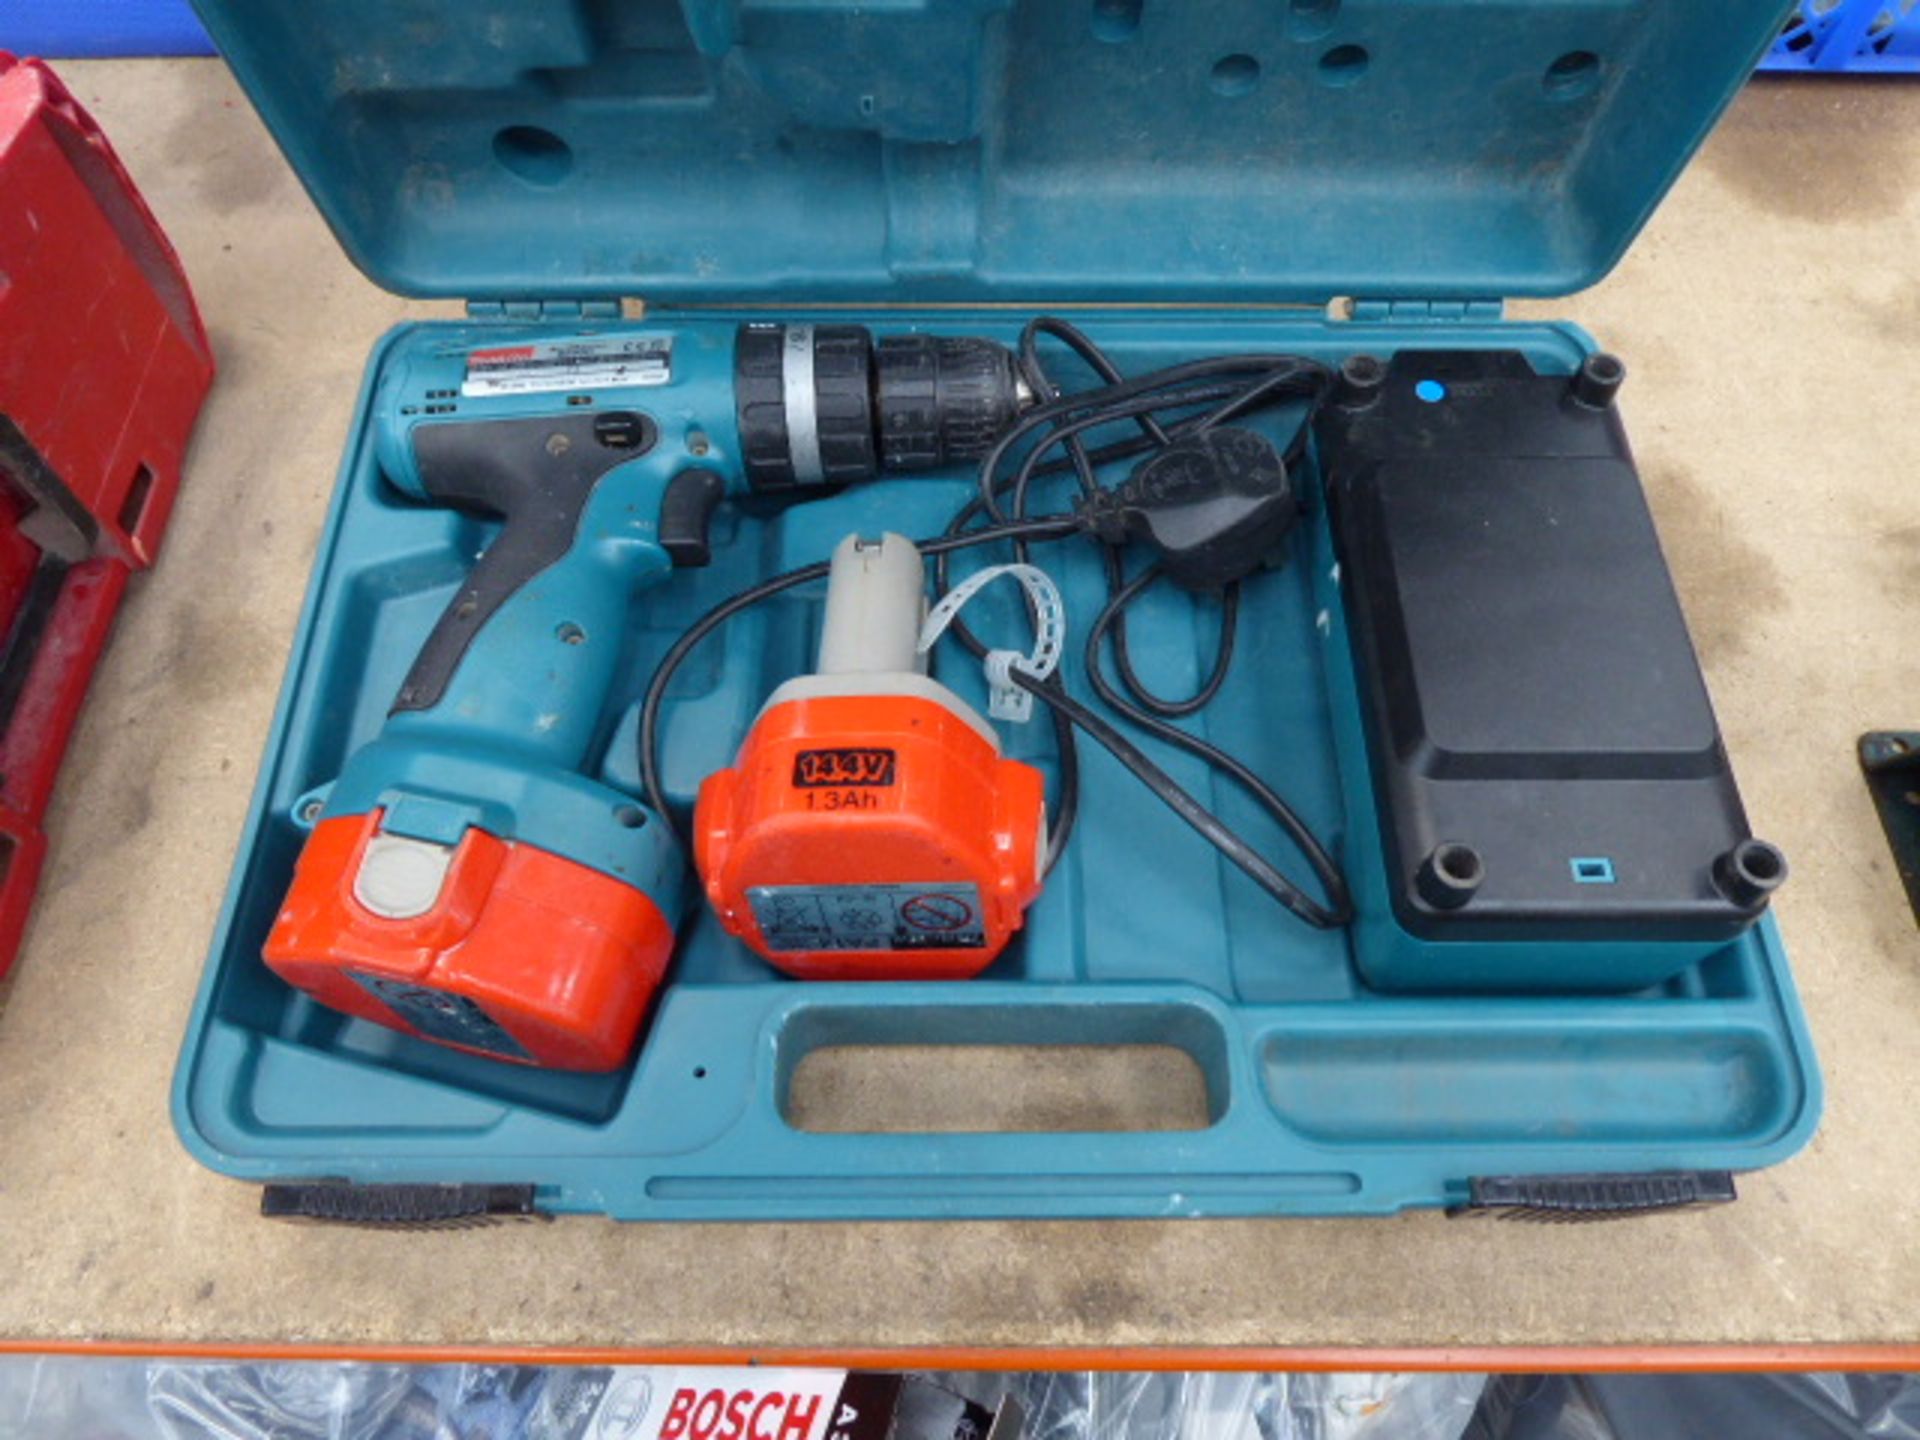 Boxed Makita cordless drill containing 2 batteries and charger